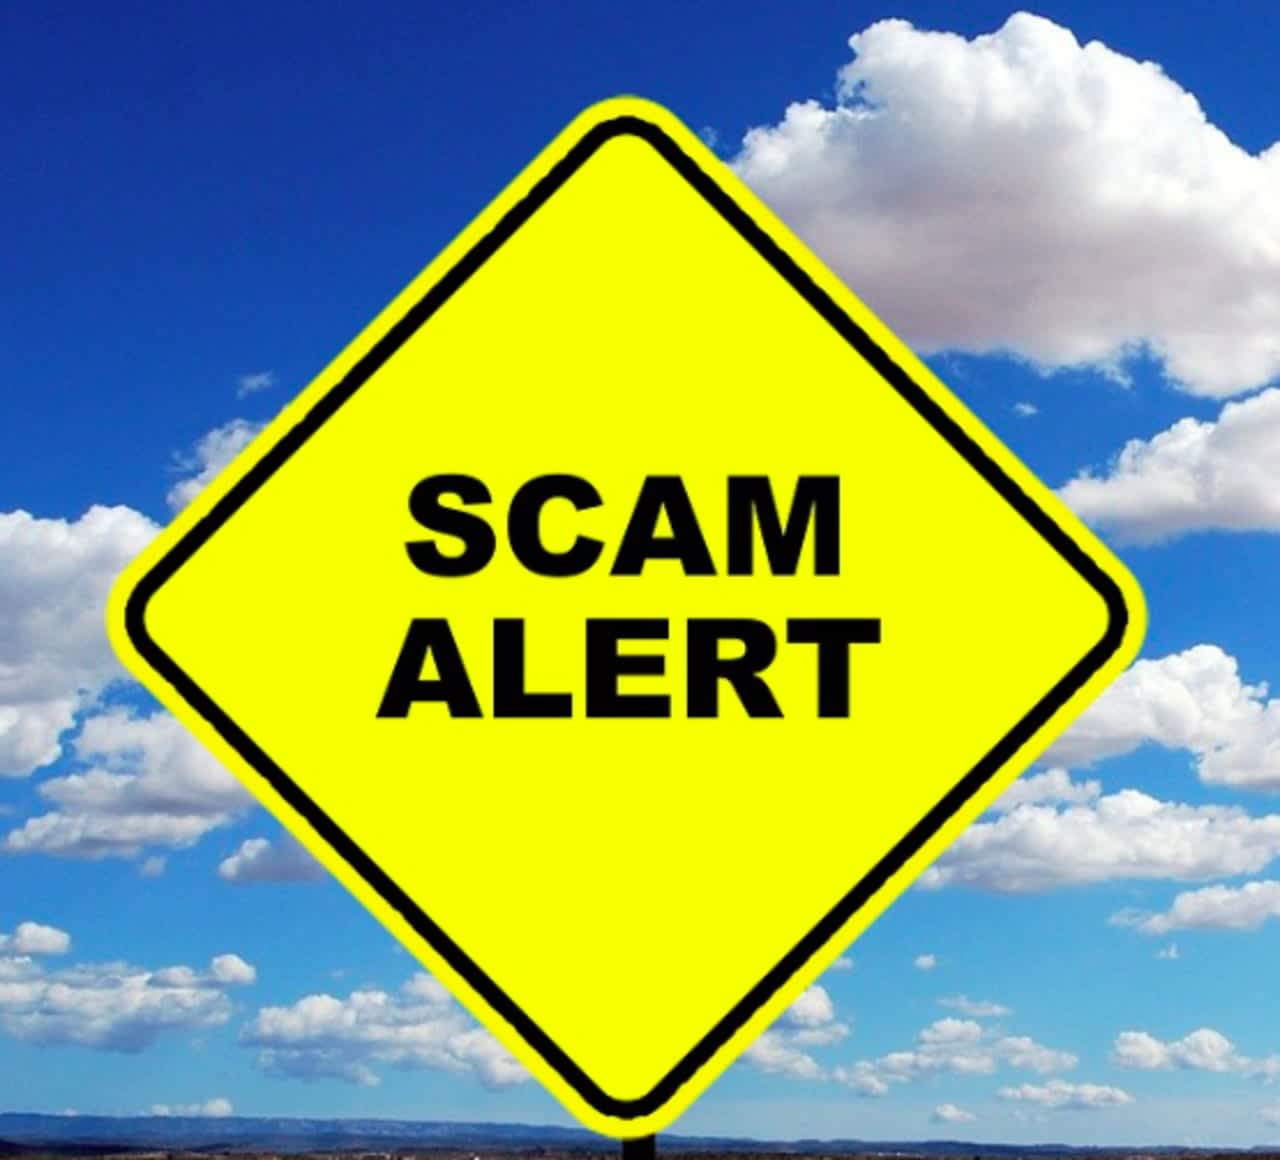 Police in Fairfield County are warning residents of an increase in scams.